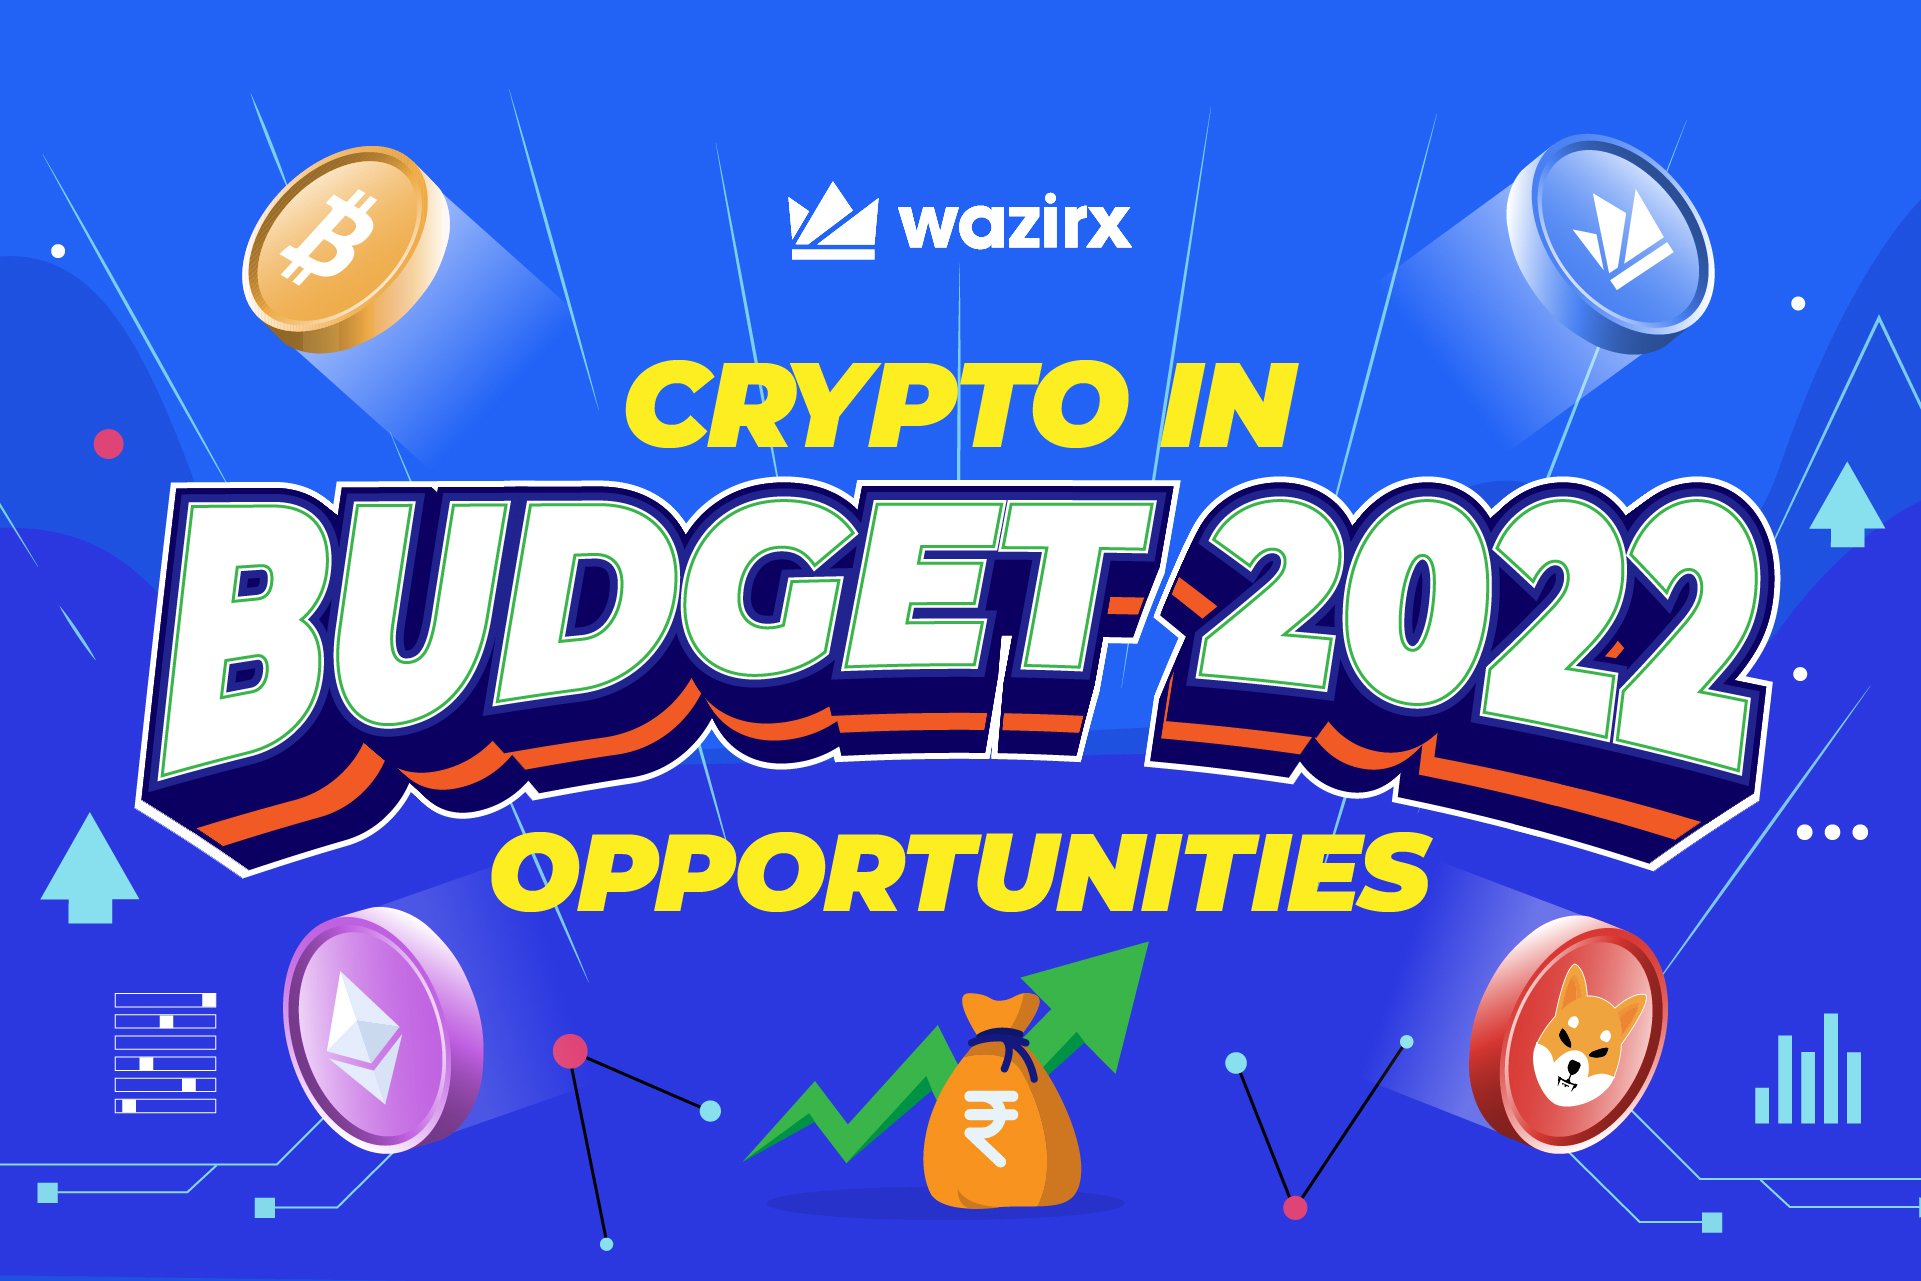 2022 Budget has the potential to create career opportunities for India in Web3